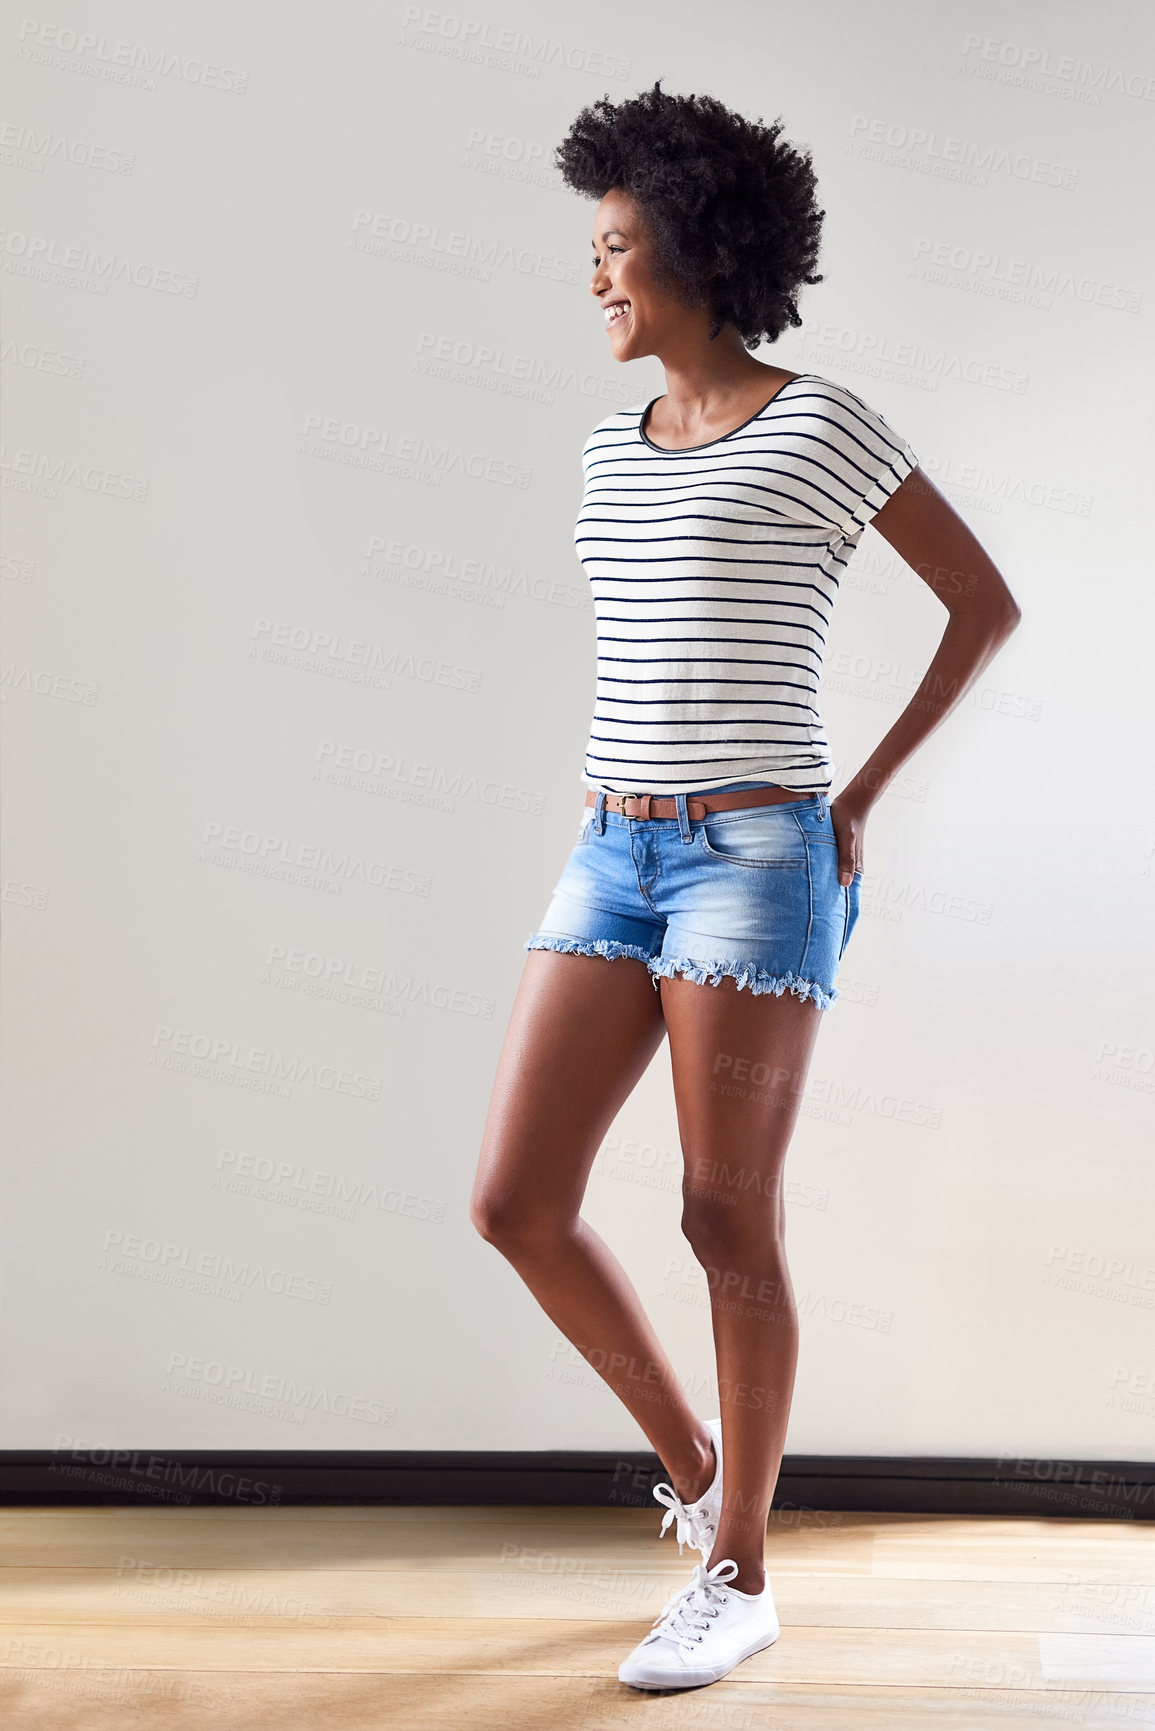 Buy stock photo Shot of an attractive and happy young woman wearing a striped sweater and denim shorts indoors